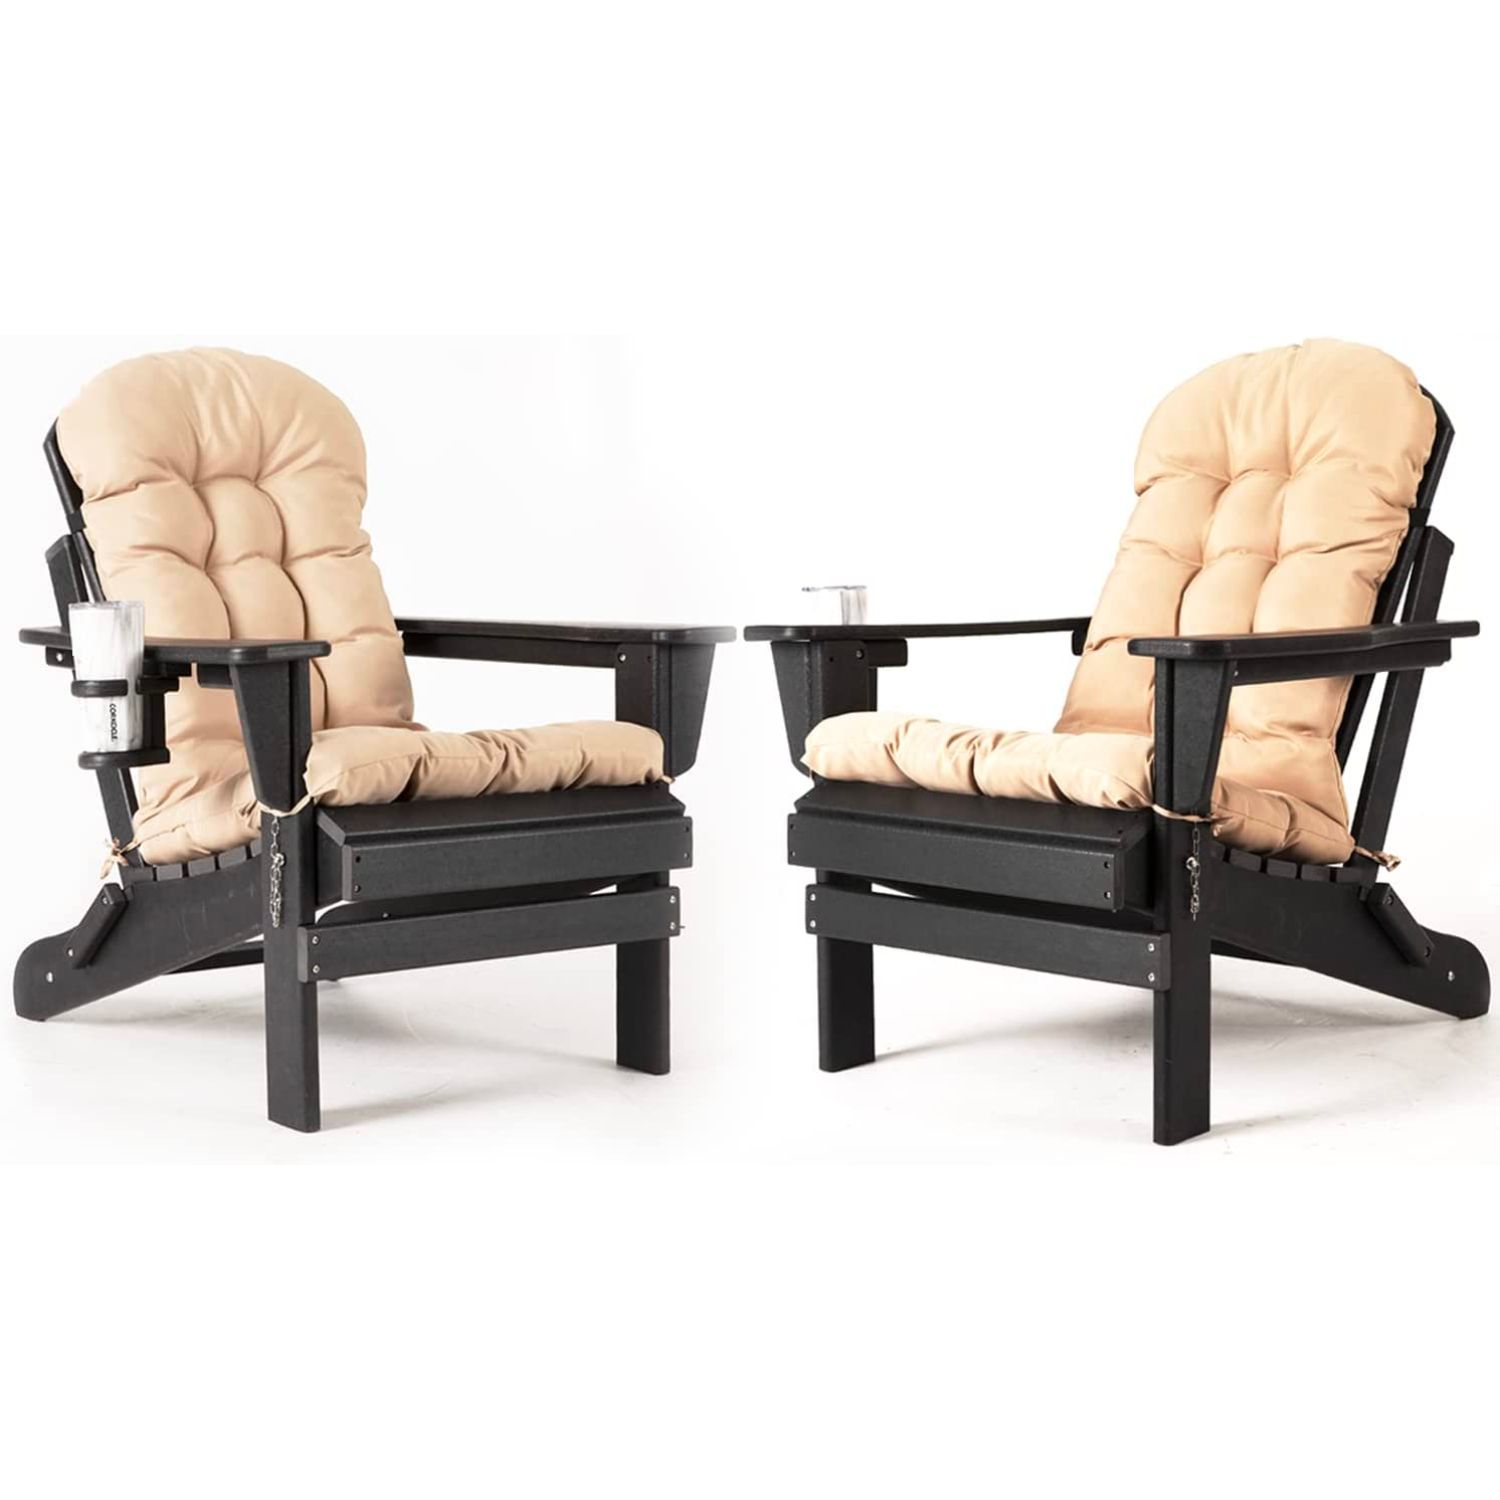 The Best Fire Pit Chairs Option: Folding Adirondack Chairs with Cushions